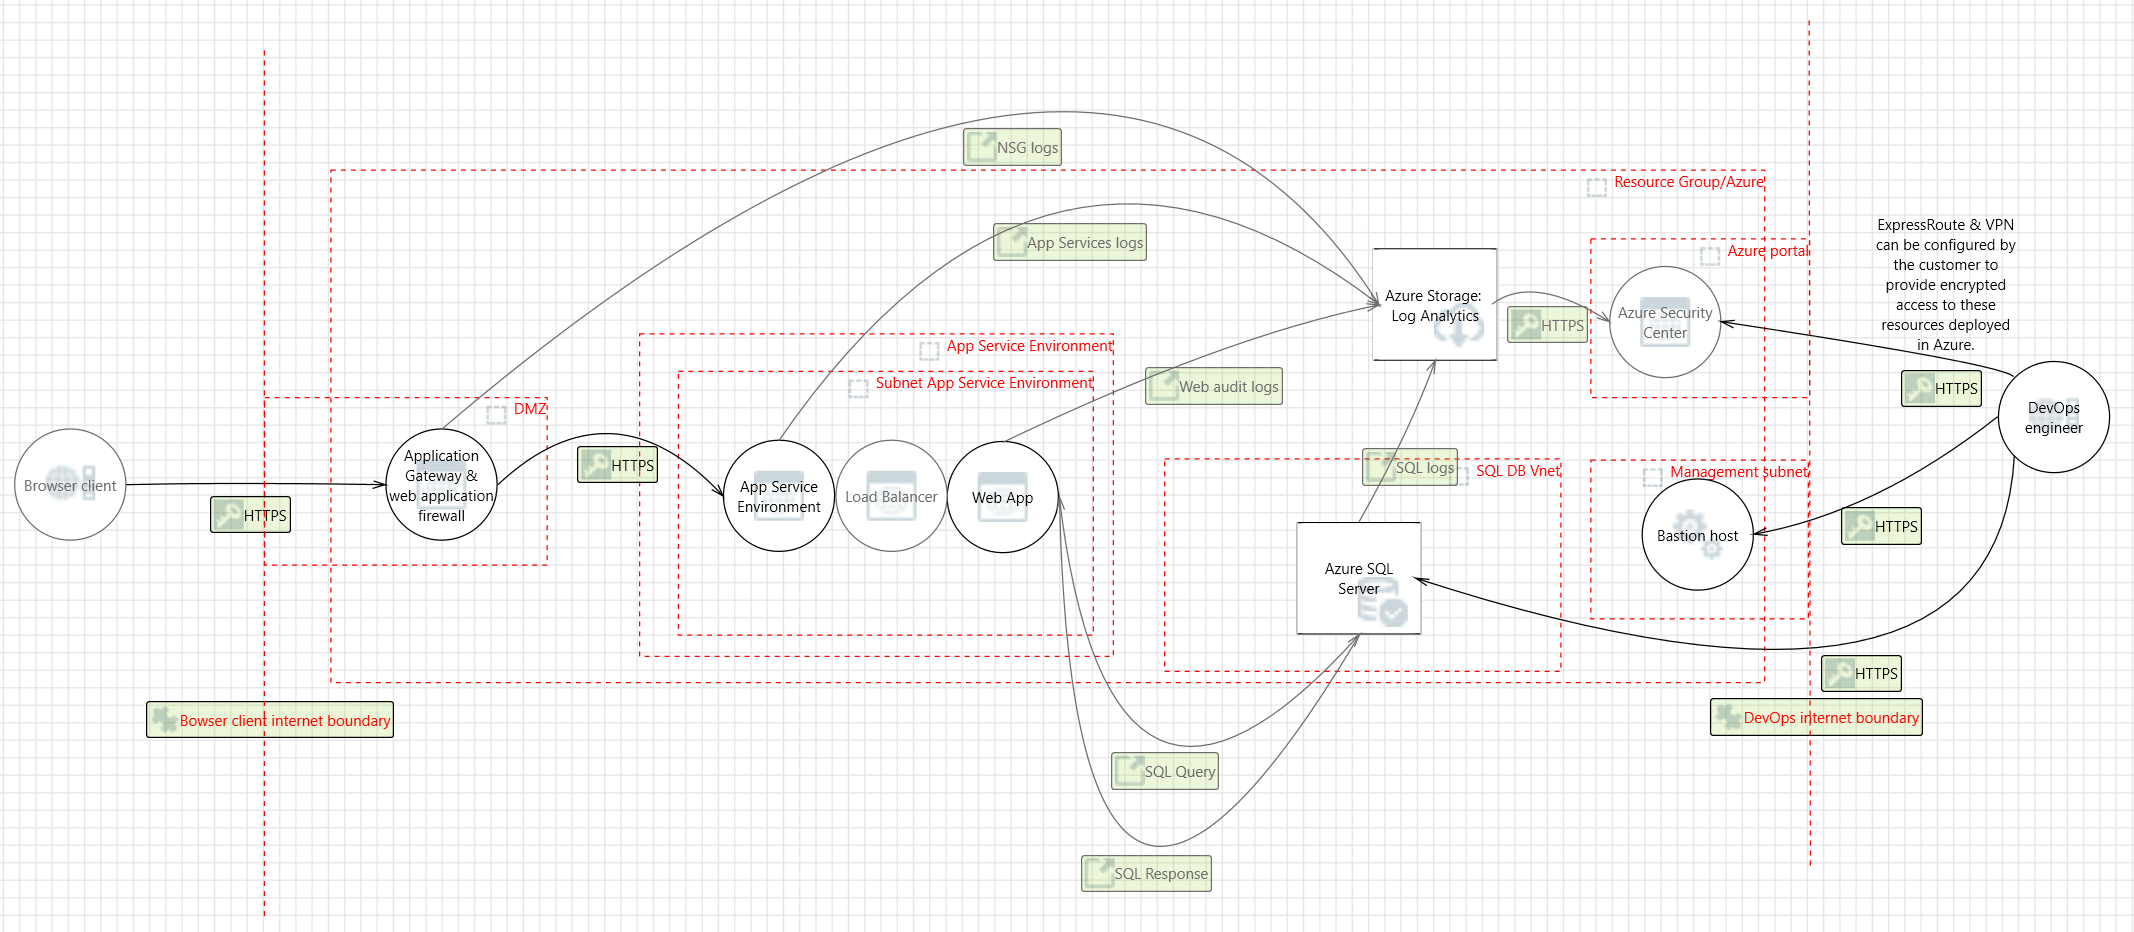 PaaS Web Application for FFIEC threat model